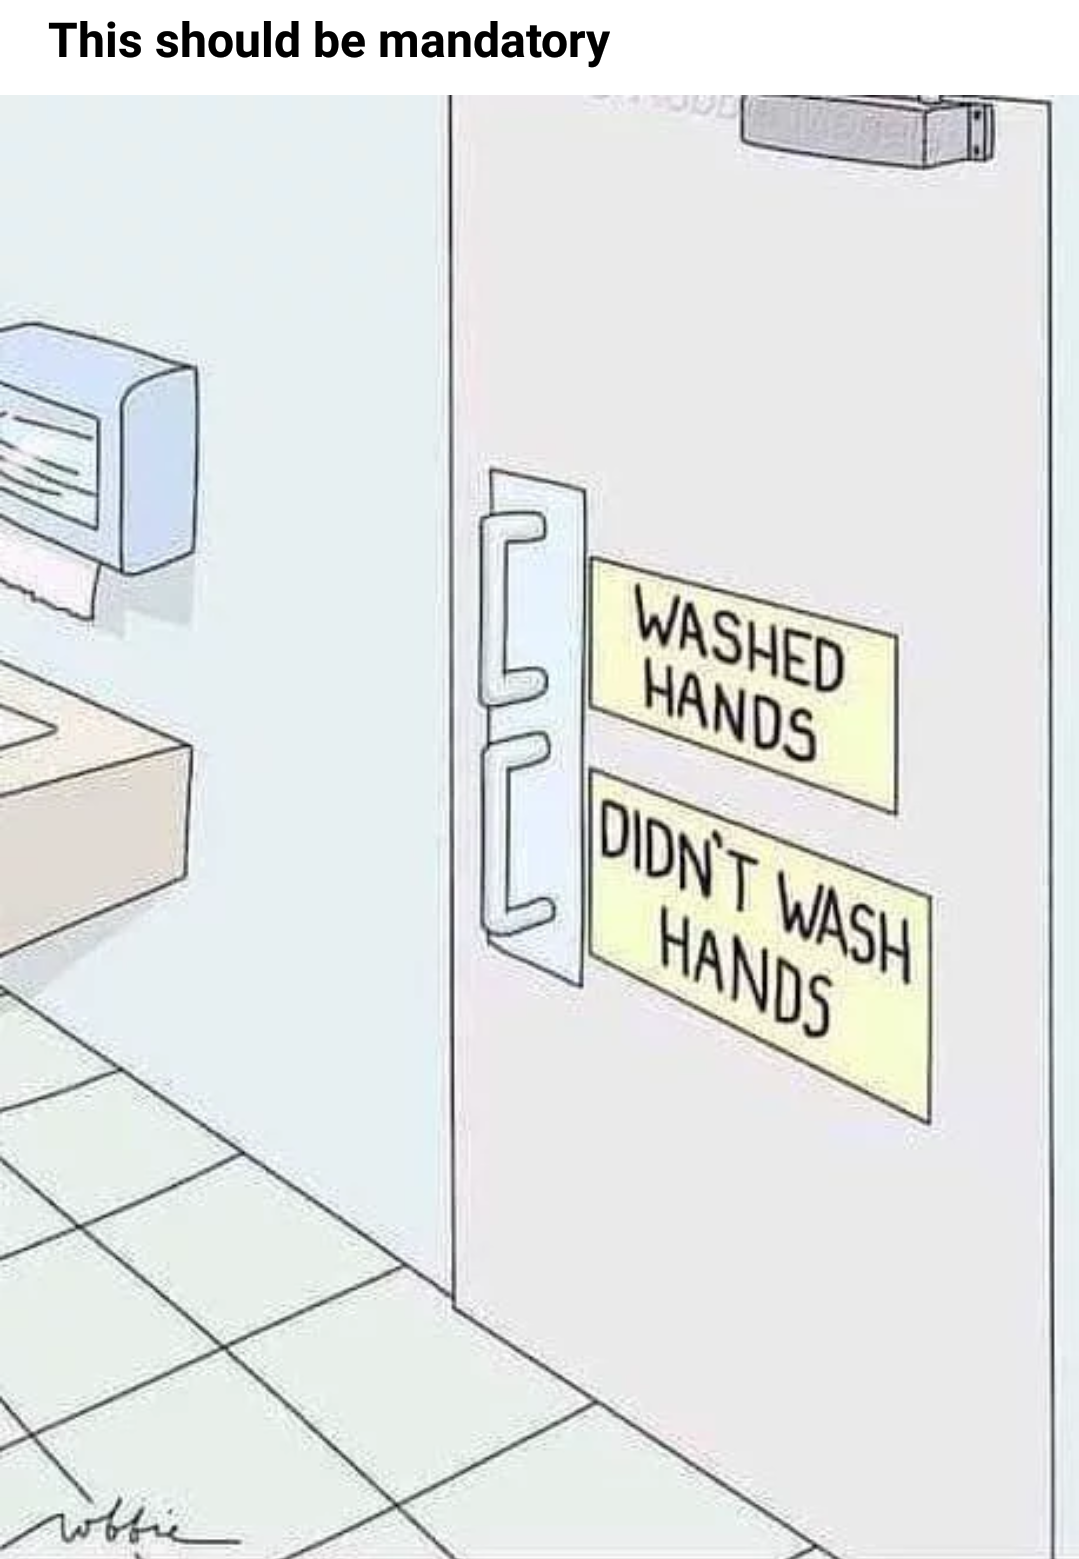 memes - cartoon - This should be mandatory Washed Hands Didnt Wash Hands